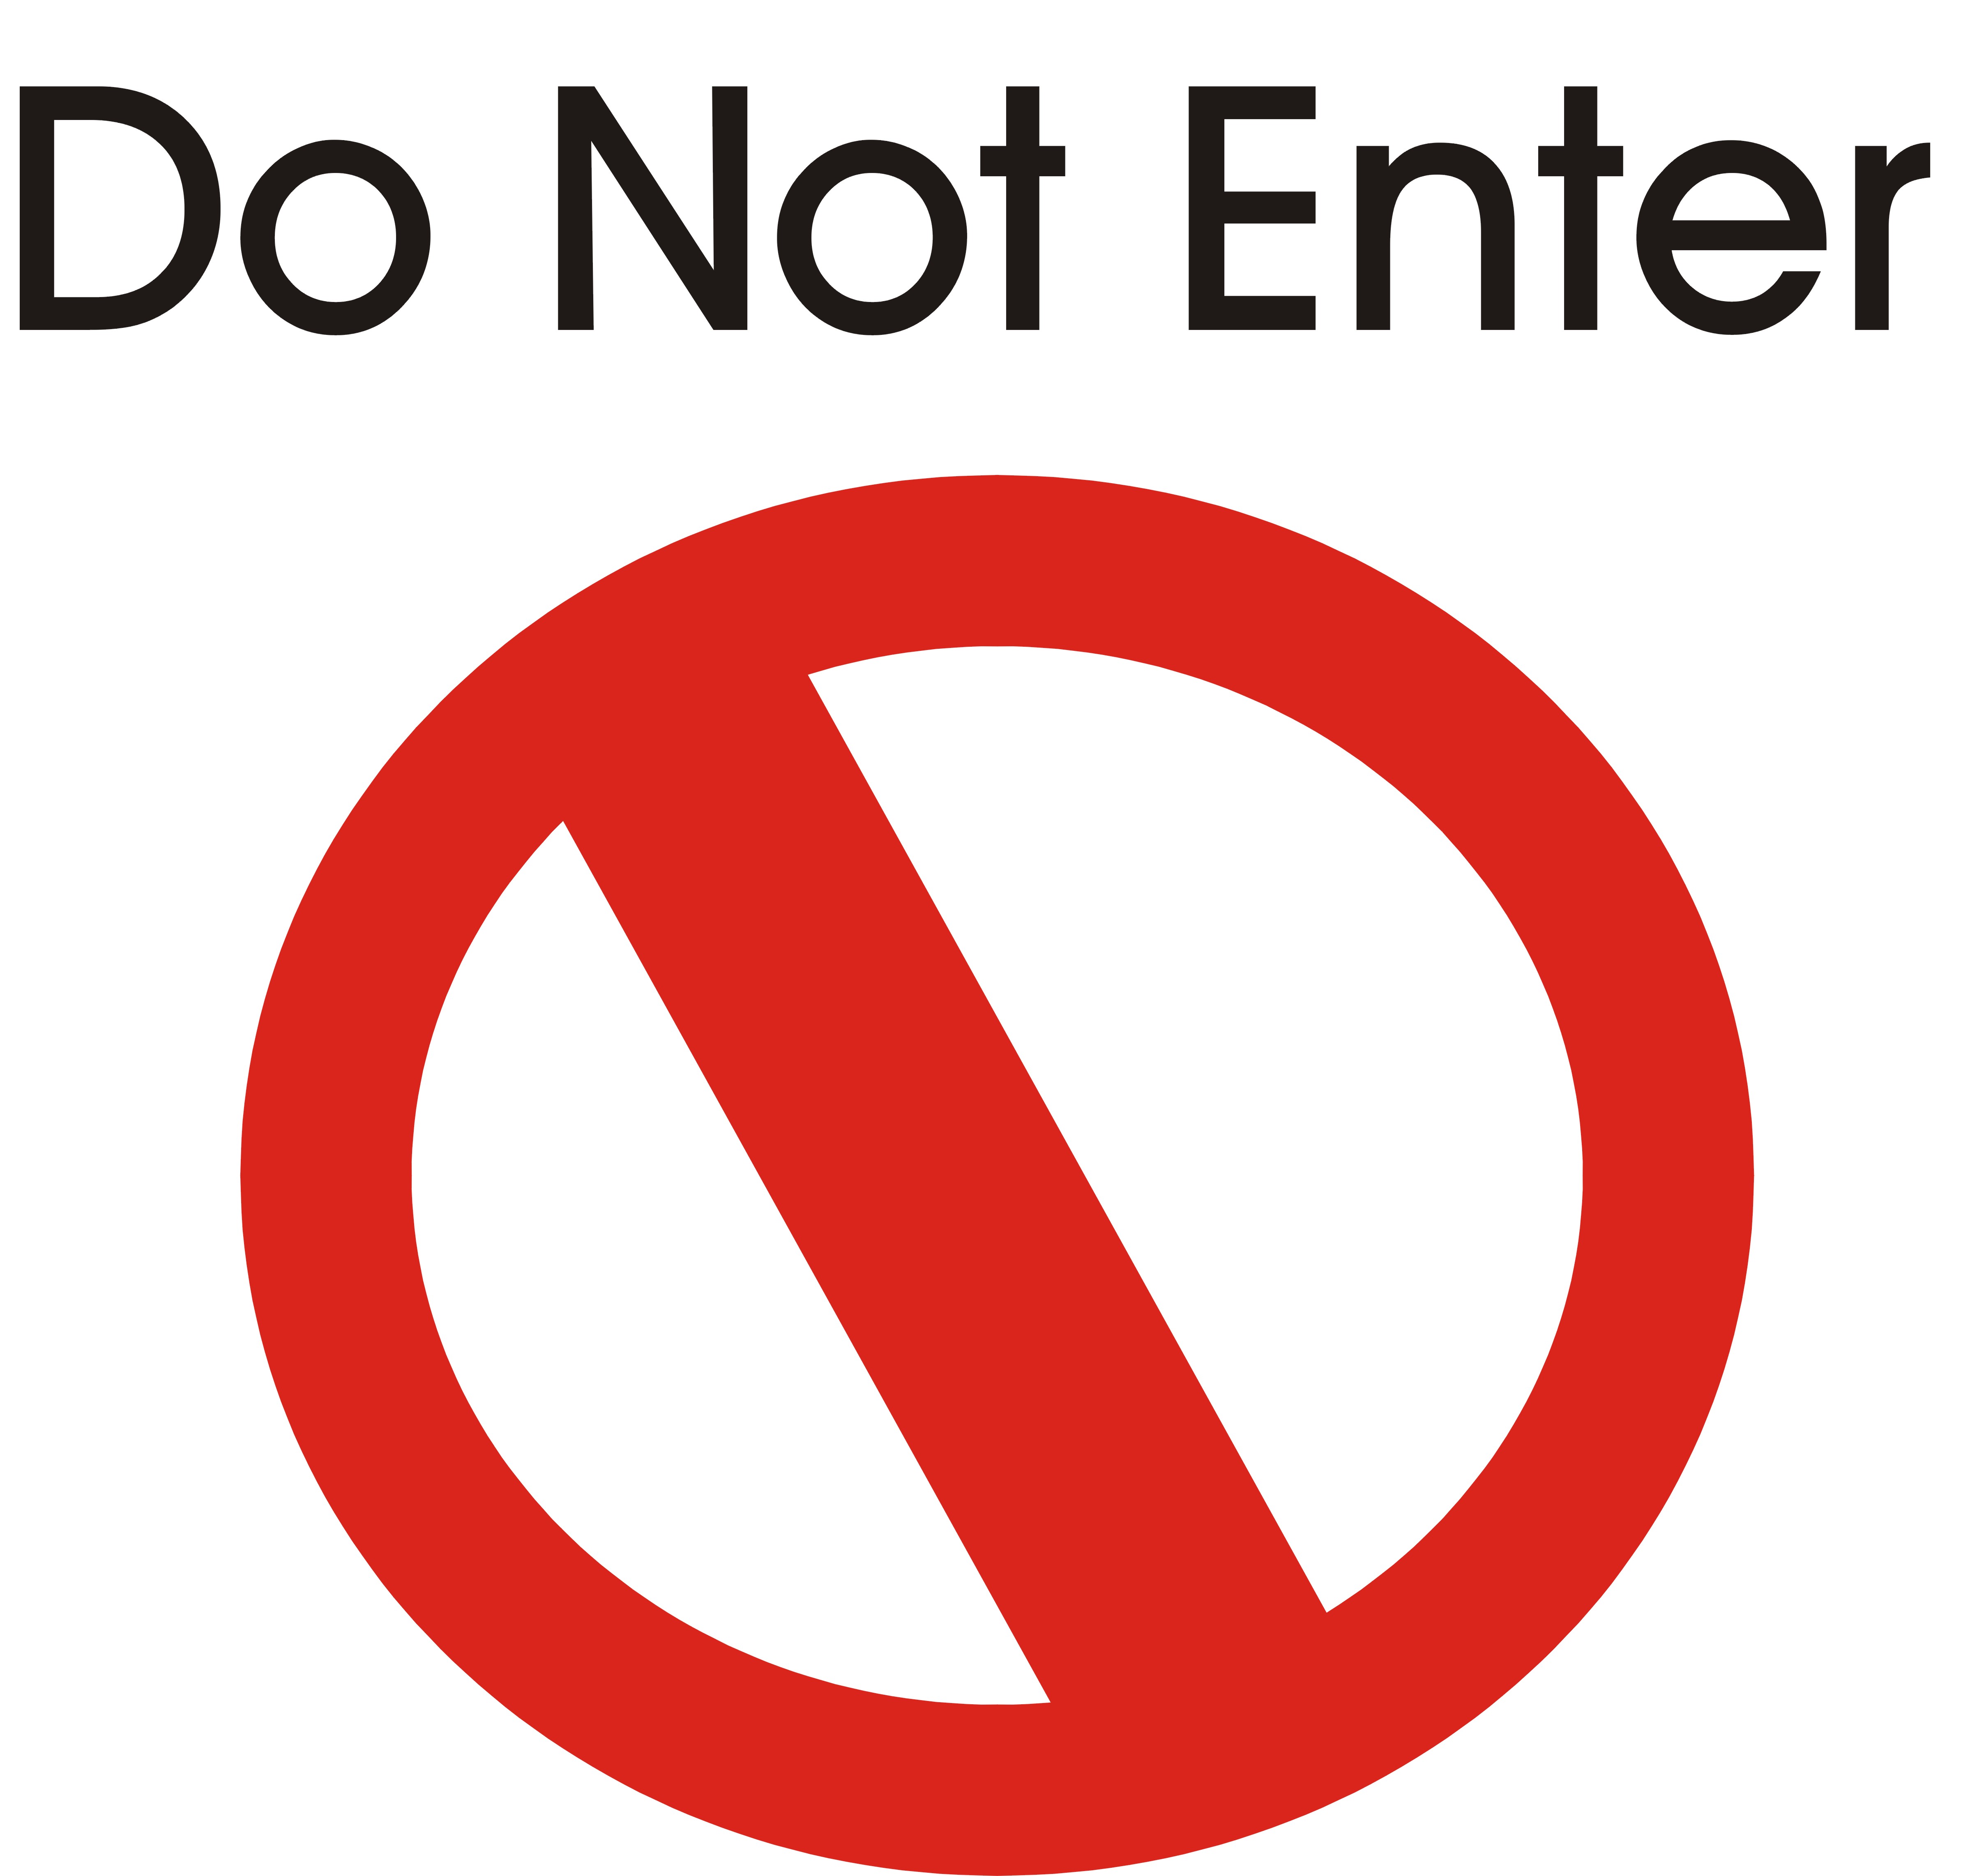 Do Not Enter Warning Sign Vector Icon - Free Icons